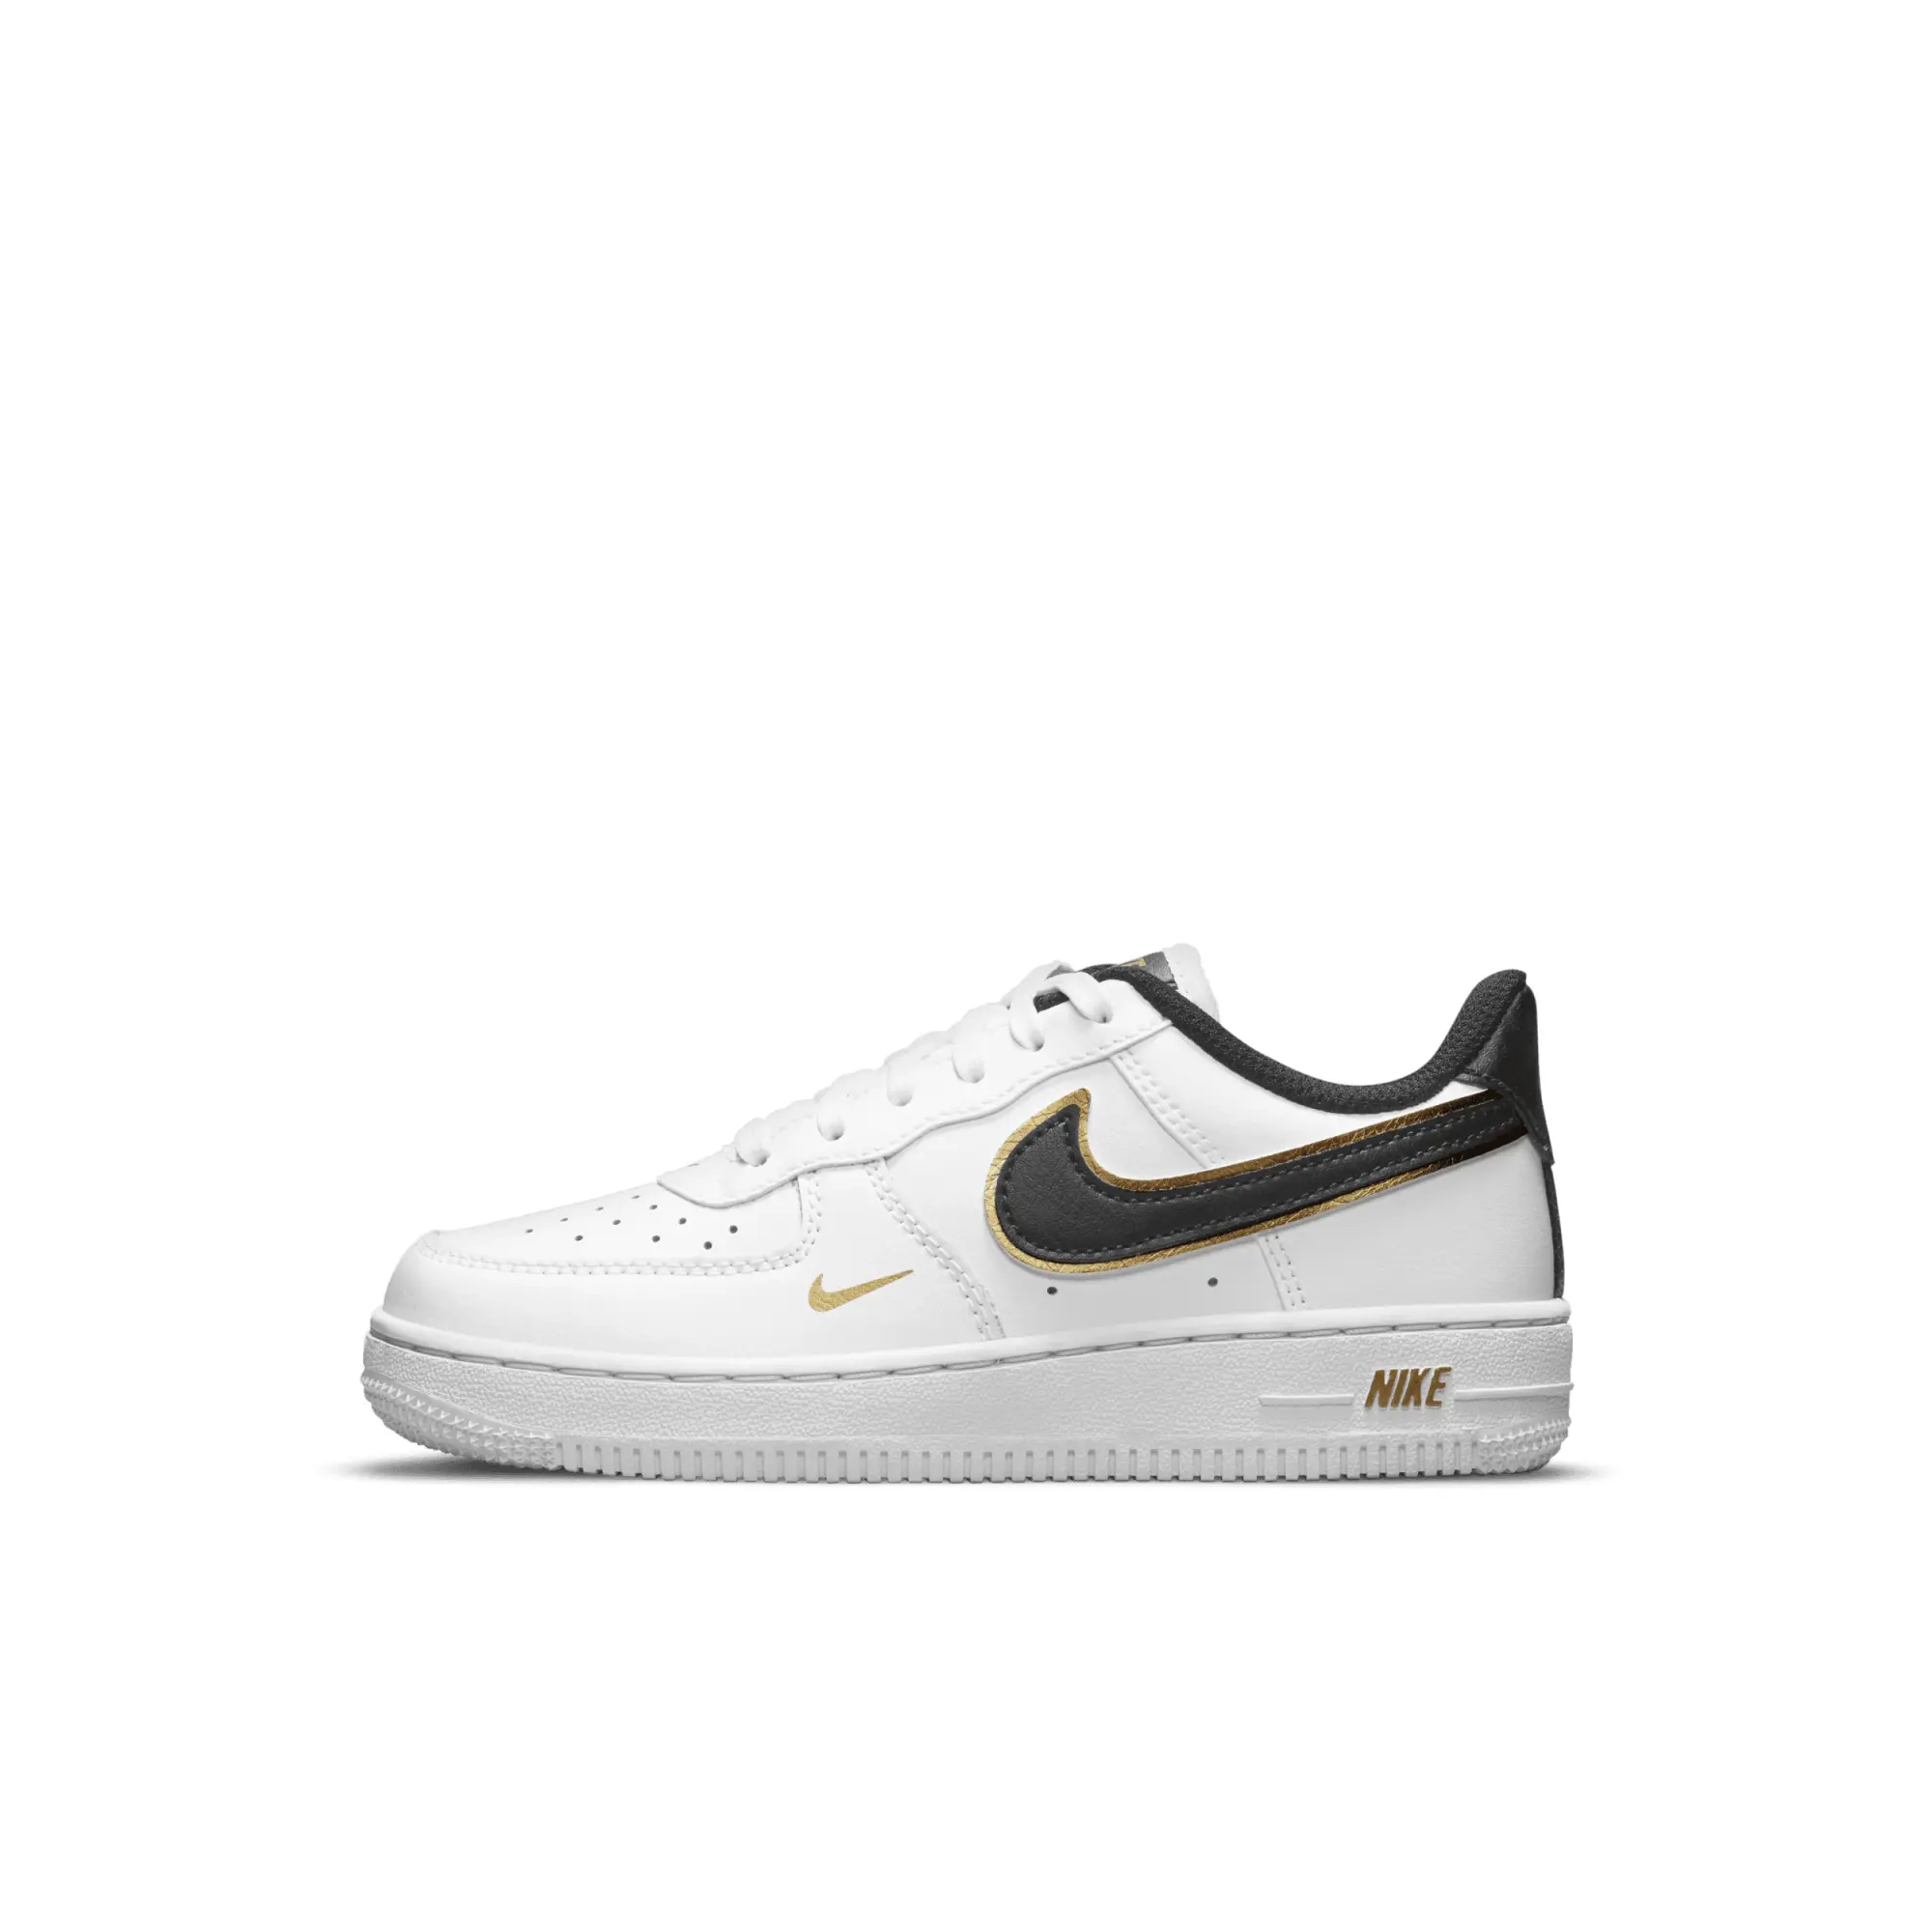 Nike Infant Air Force 1 Low Trainer - White / Black / Metallic Gold